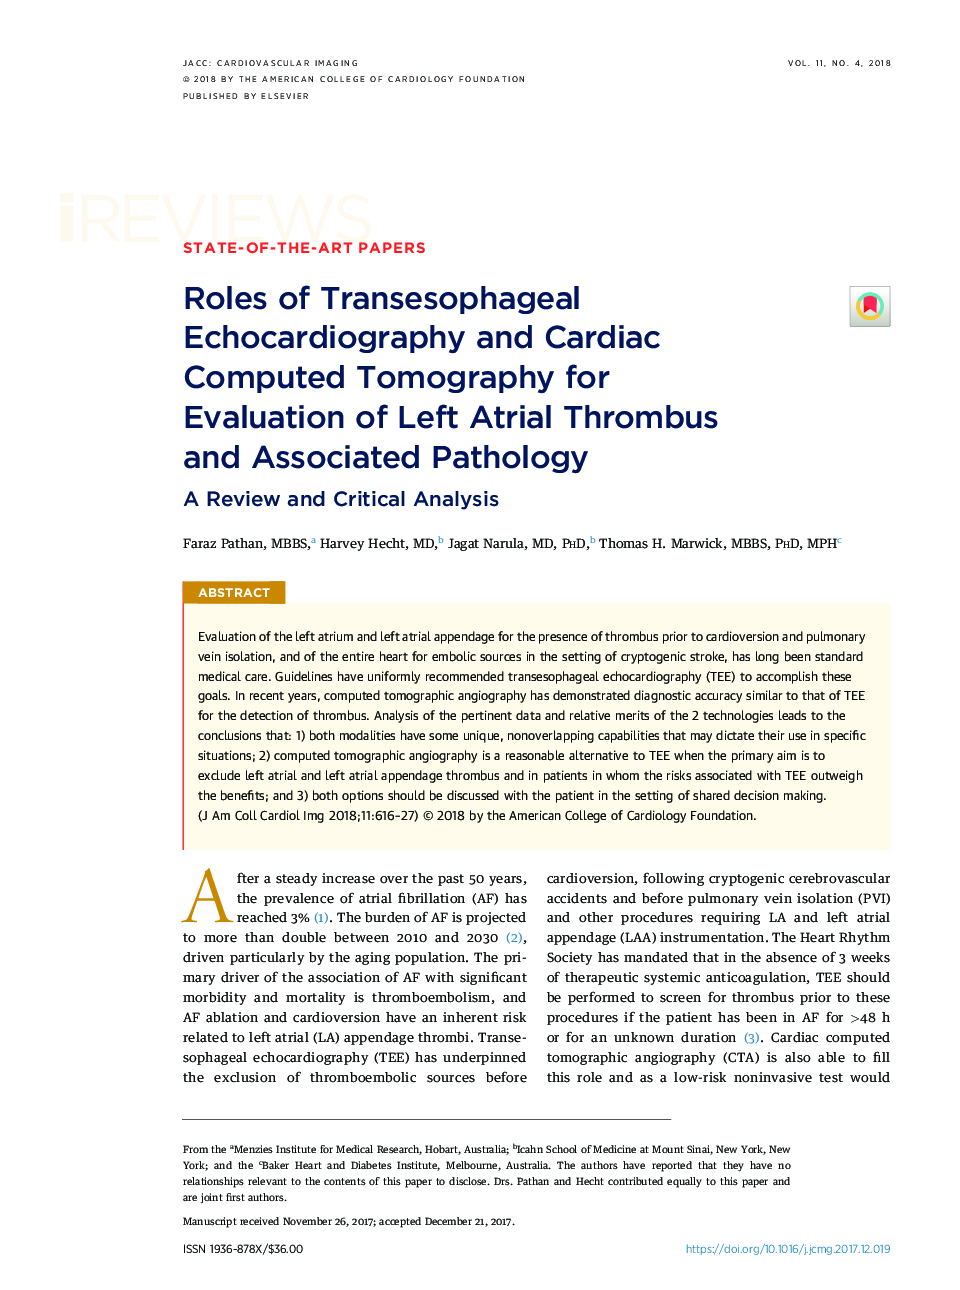 Roles of Transesophageal Echocardiography and Cardiac Computed Tomography for EvaluationÂ ofÂ Left Atrial Thrombus andÂ Associated Pathology